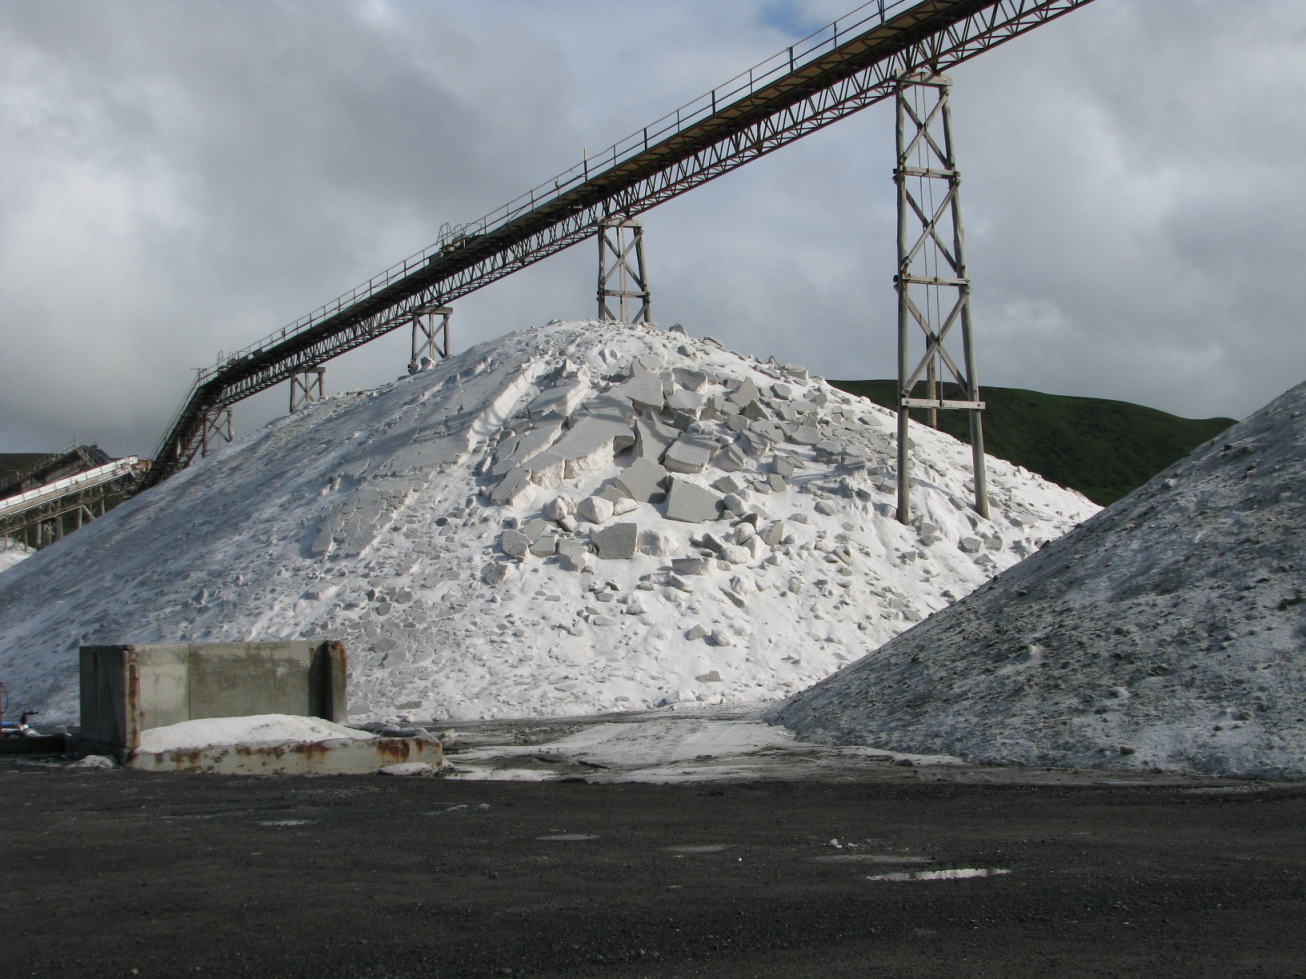 Crust of the salt pile at Lake Grassmere was broken into blocks due to earthquake shaking and the settlement of the pile.